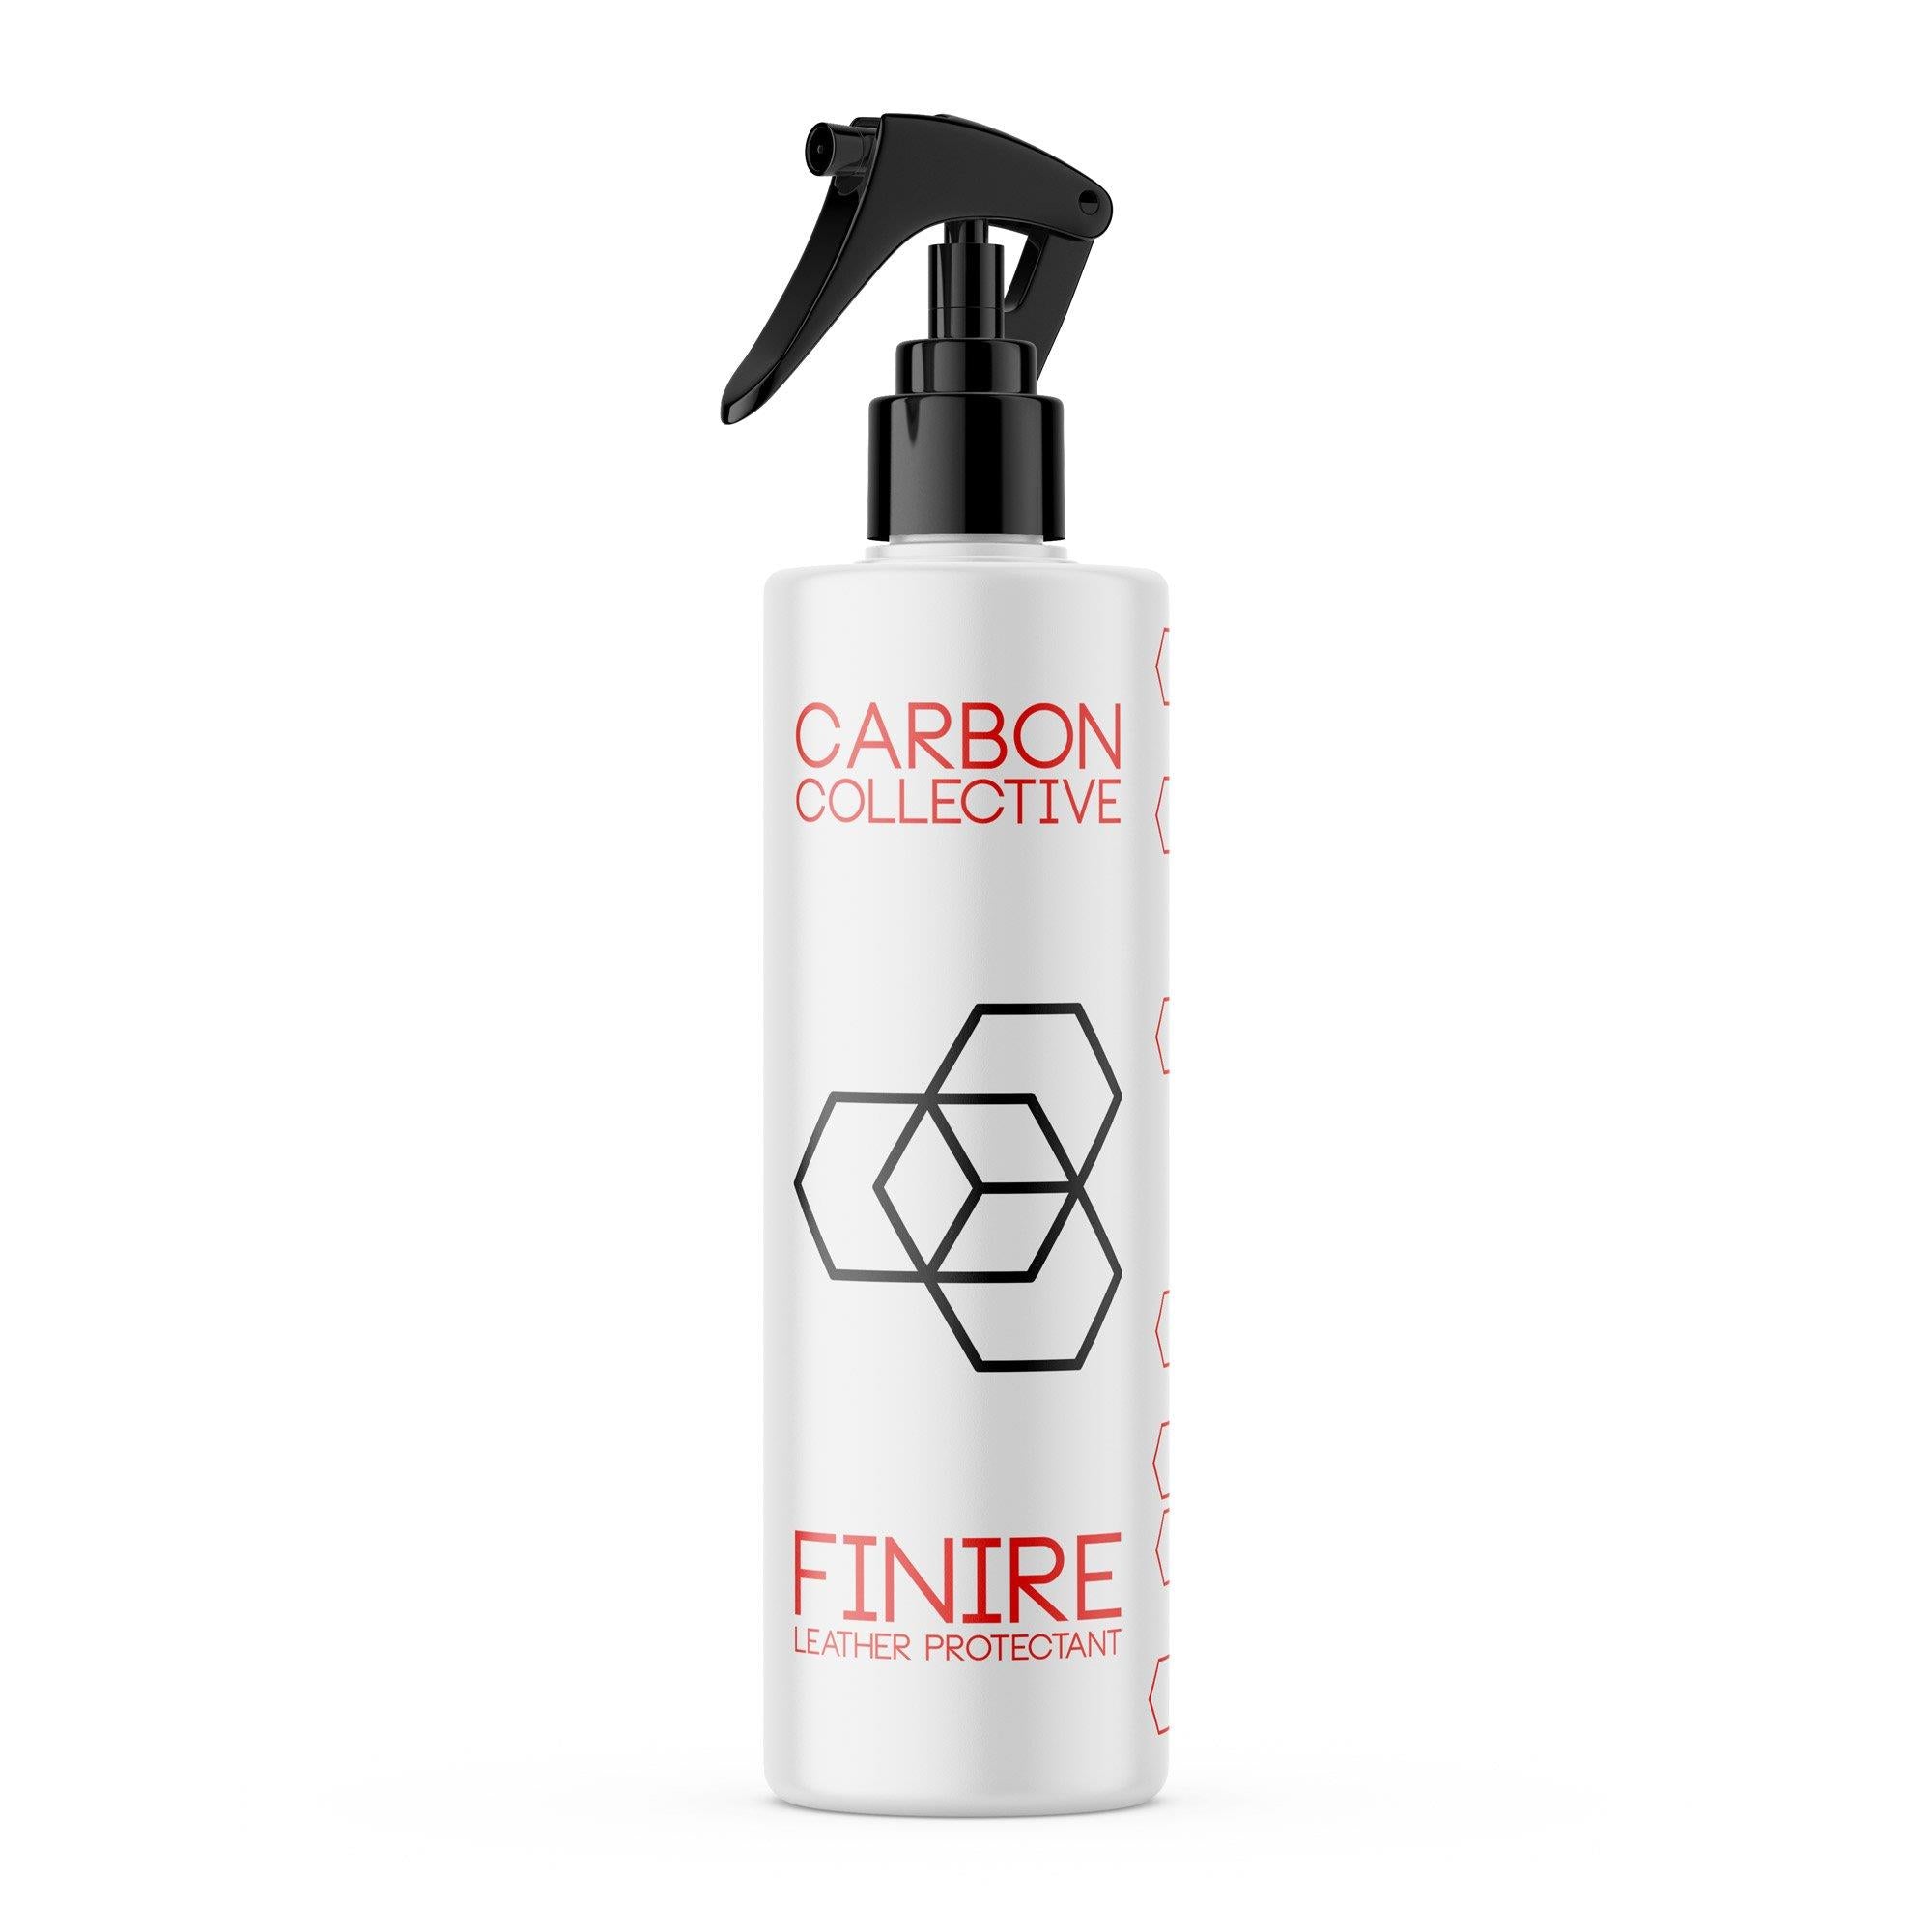 Carbon Collective Finire Leather Protectant 2.0